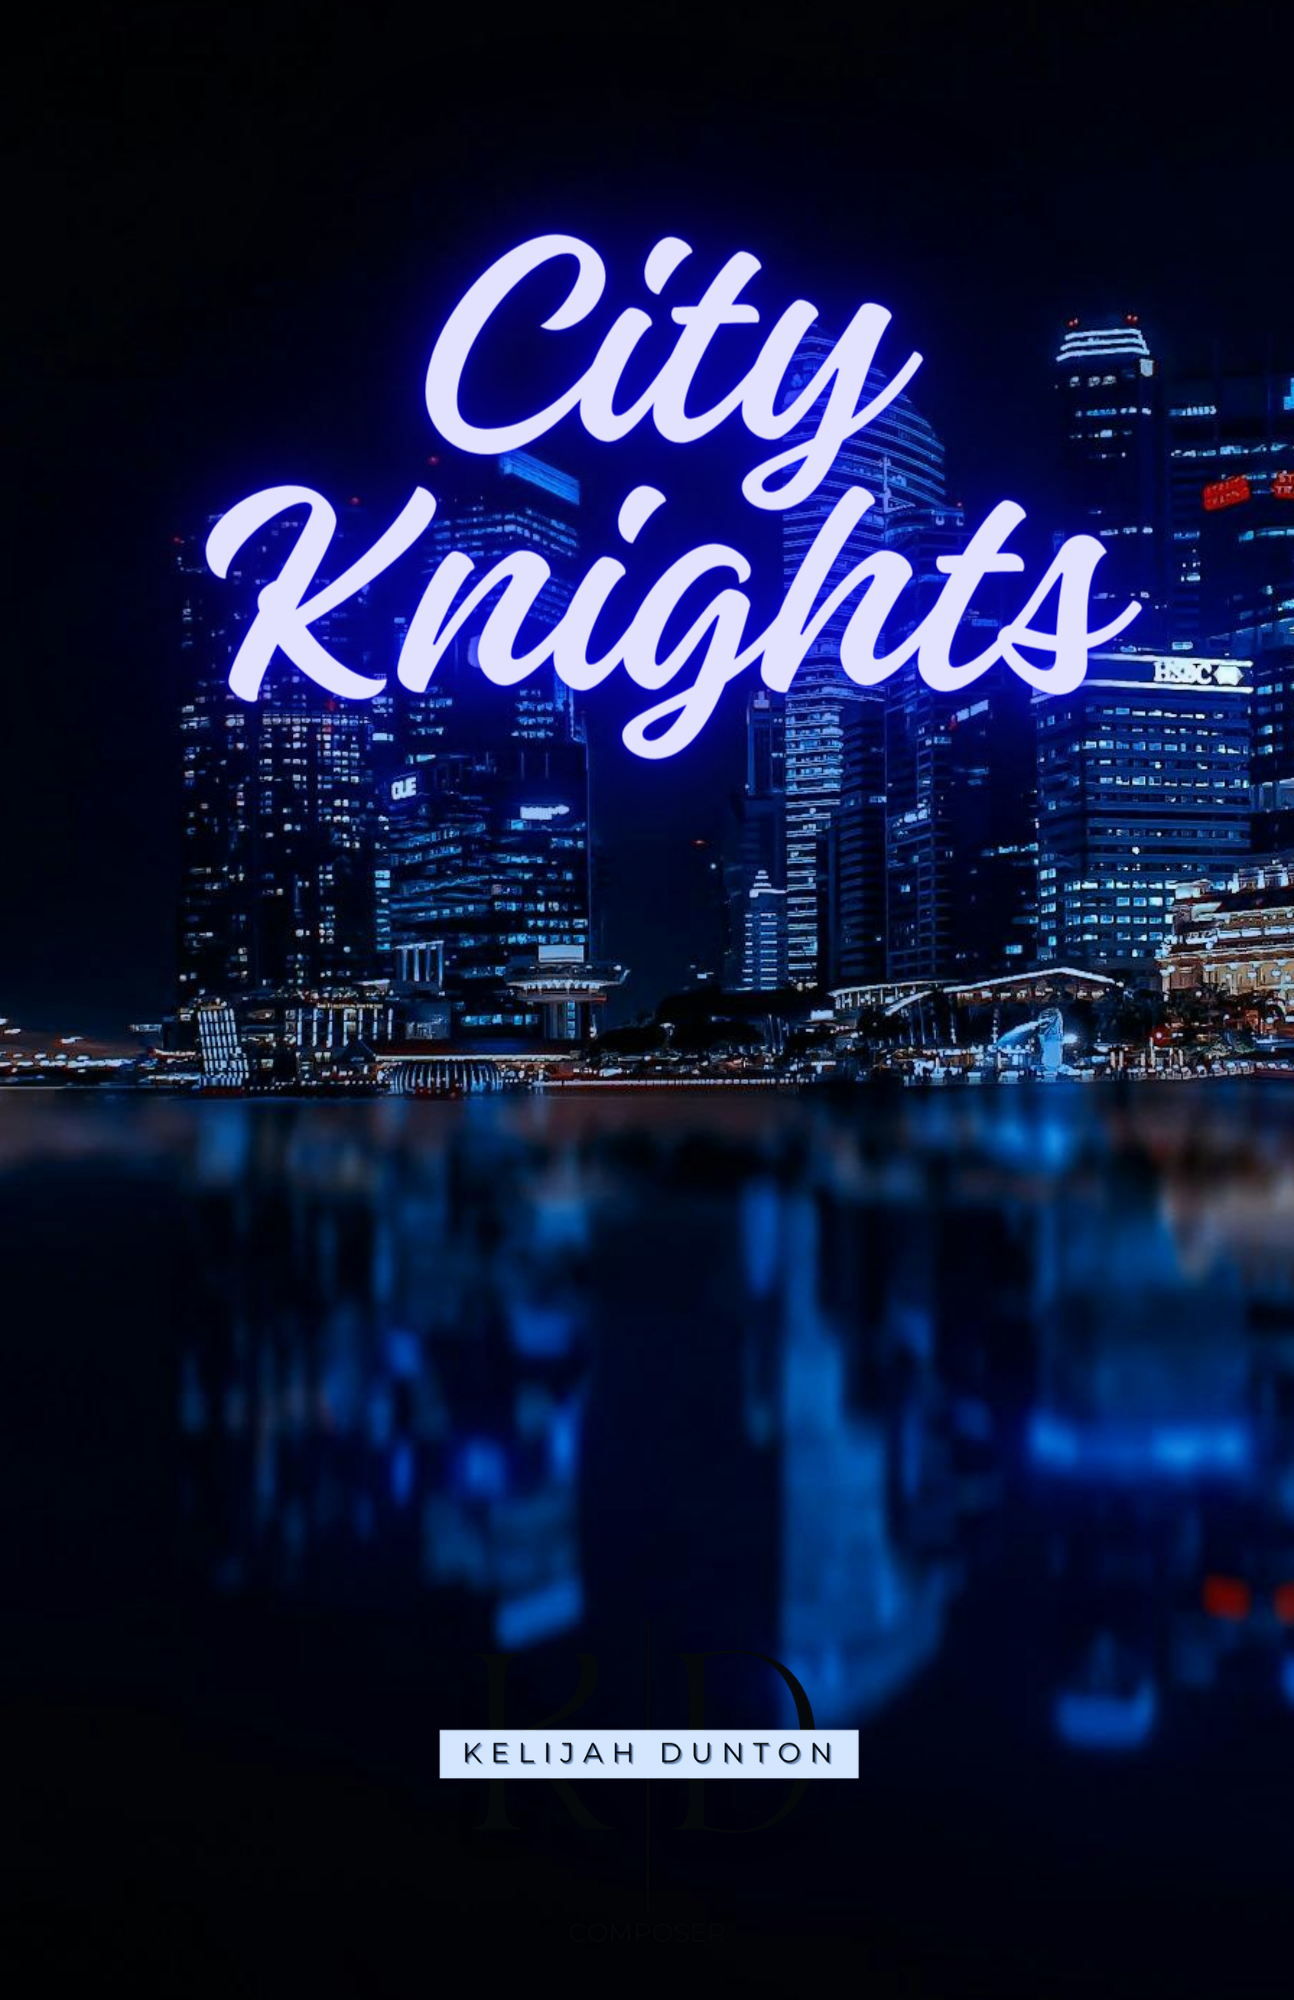 City Knights (2018) For Wind Ensemble (PDFs)